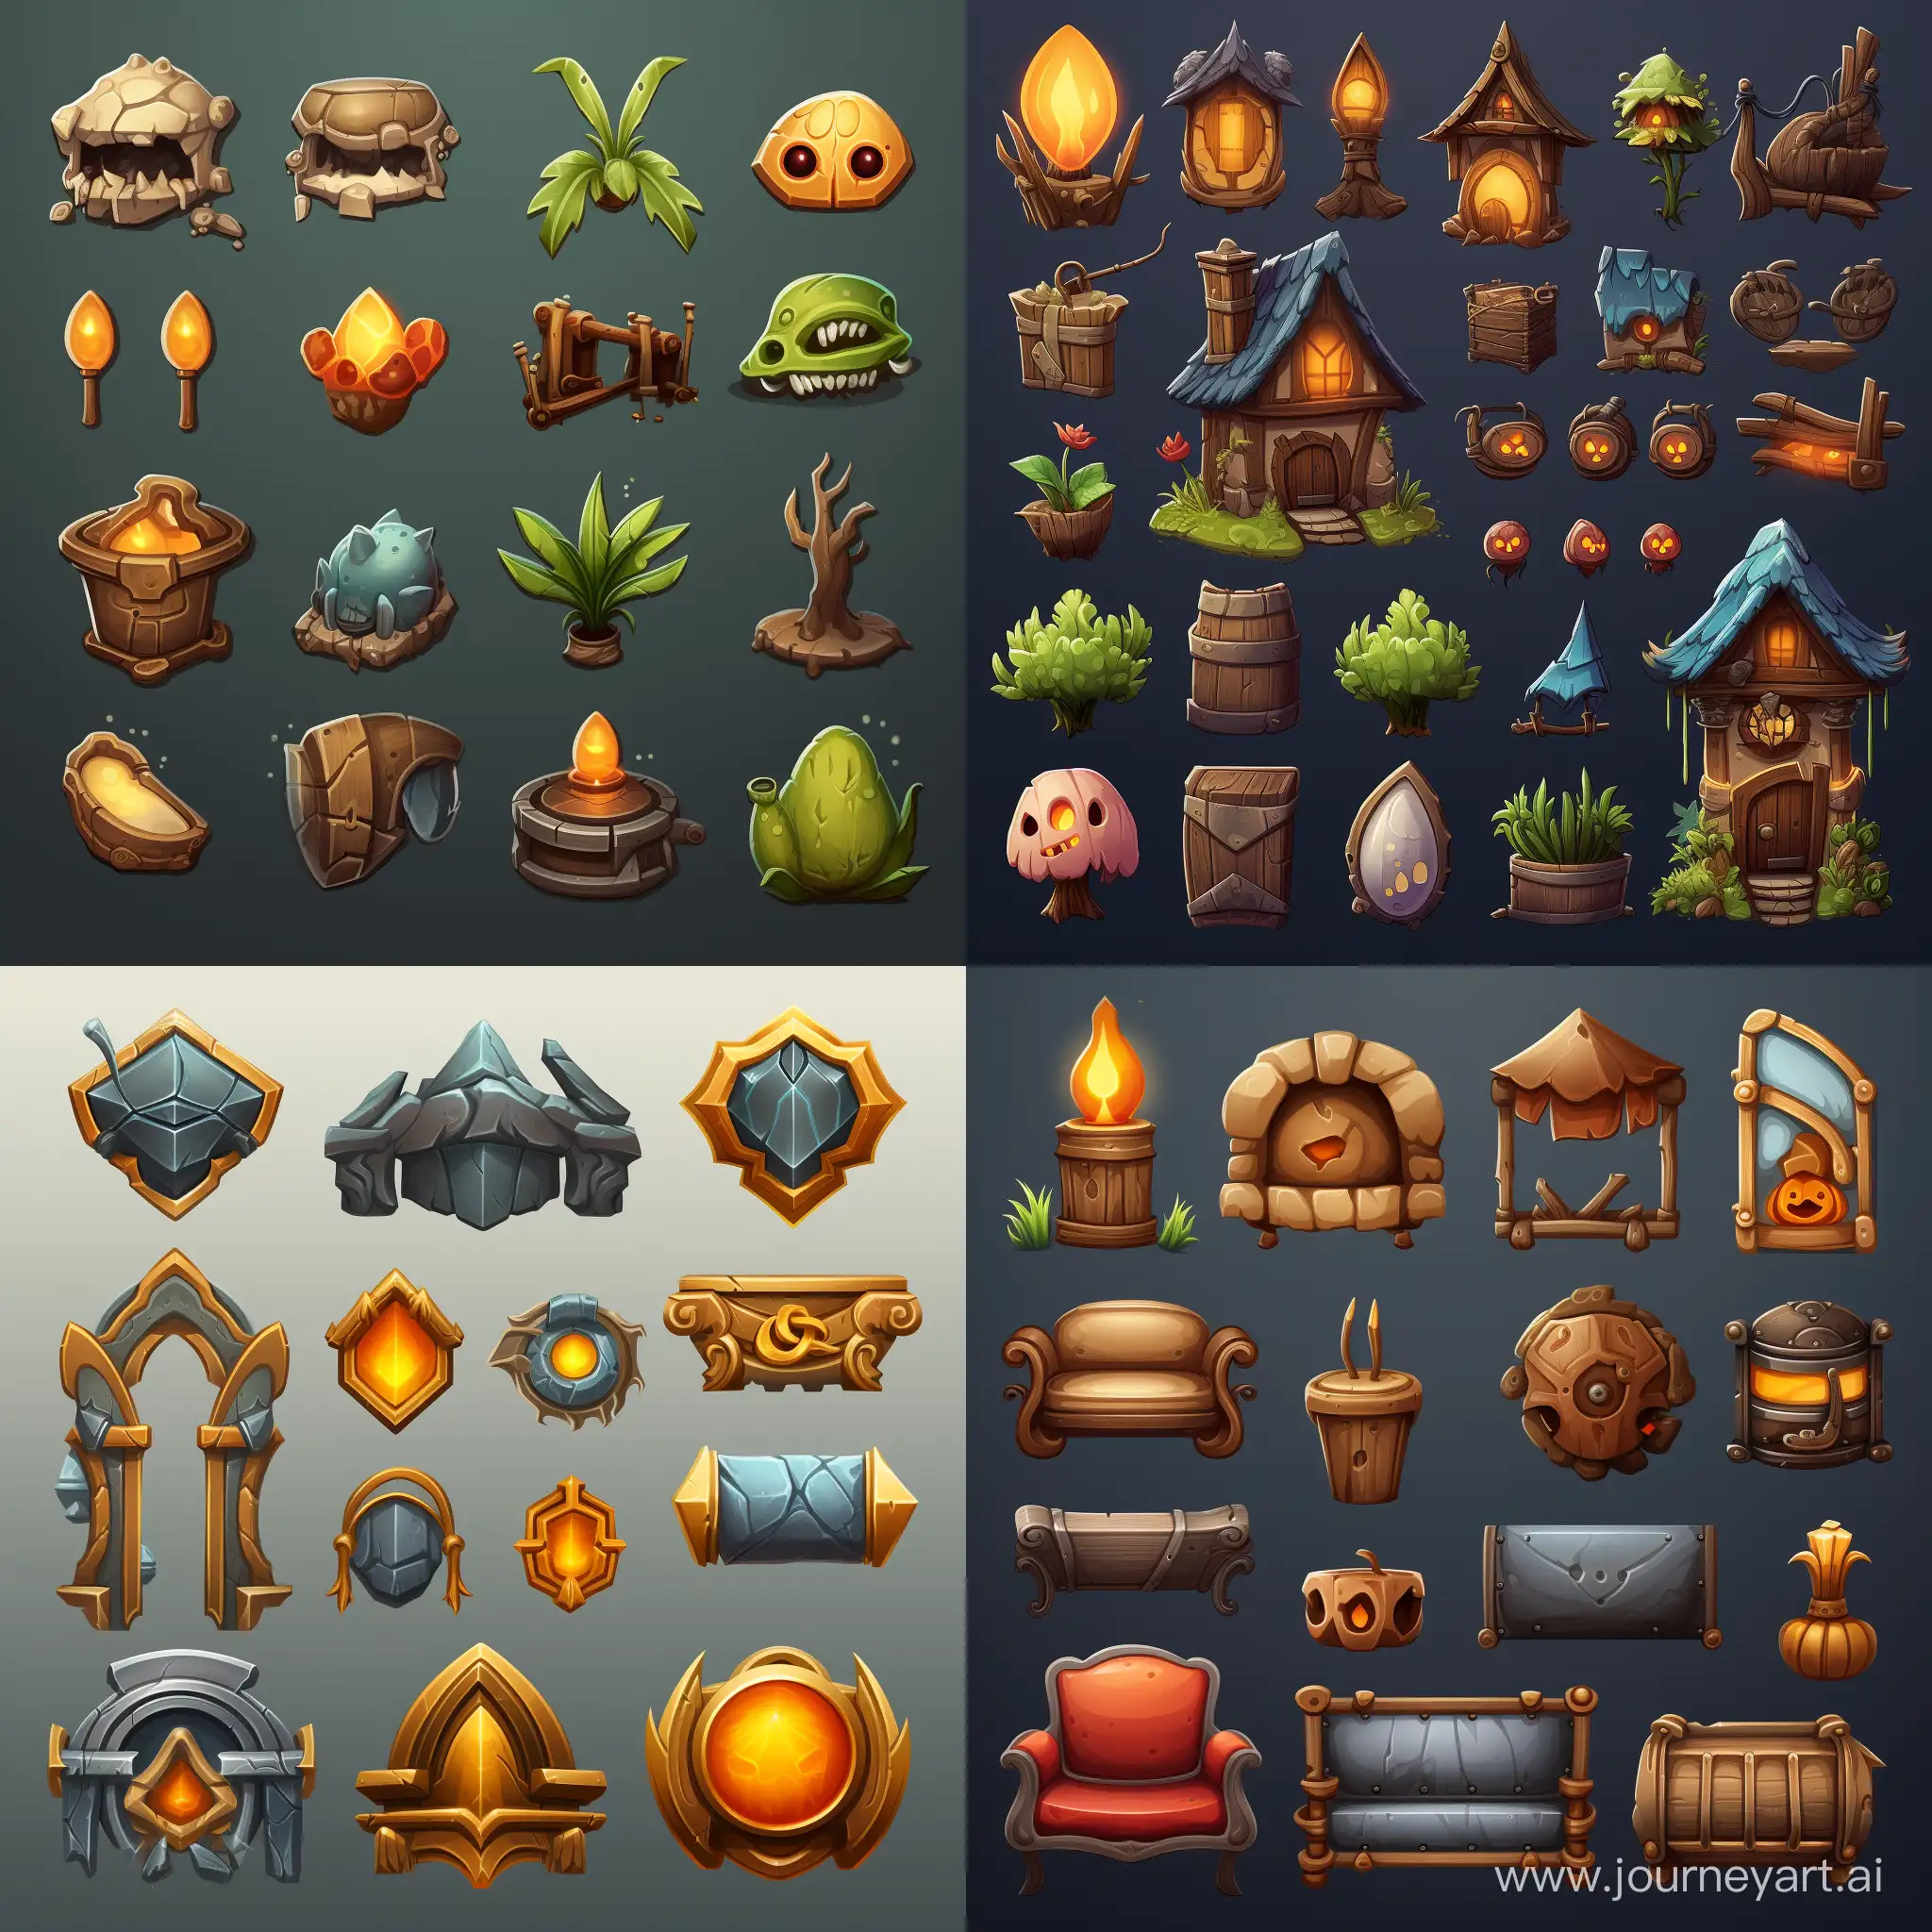 Custom-2D-Game-Design-Versatile-Icons-Objects-Assets-and-UI-Elements